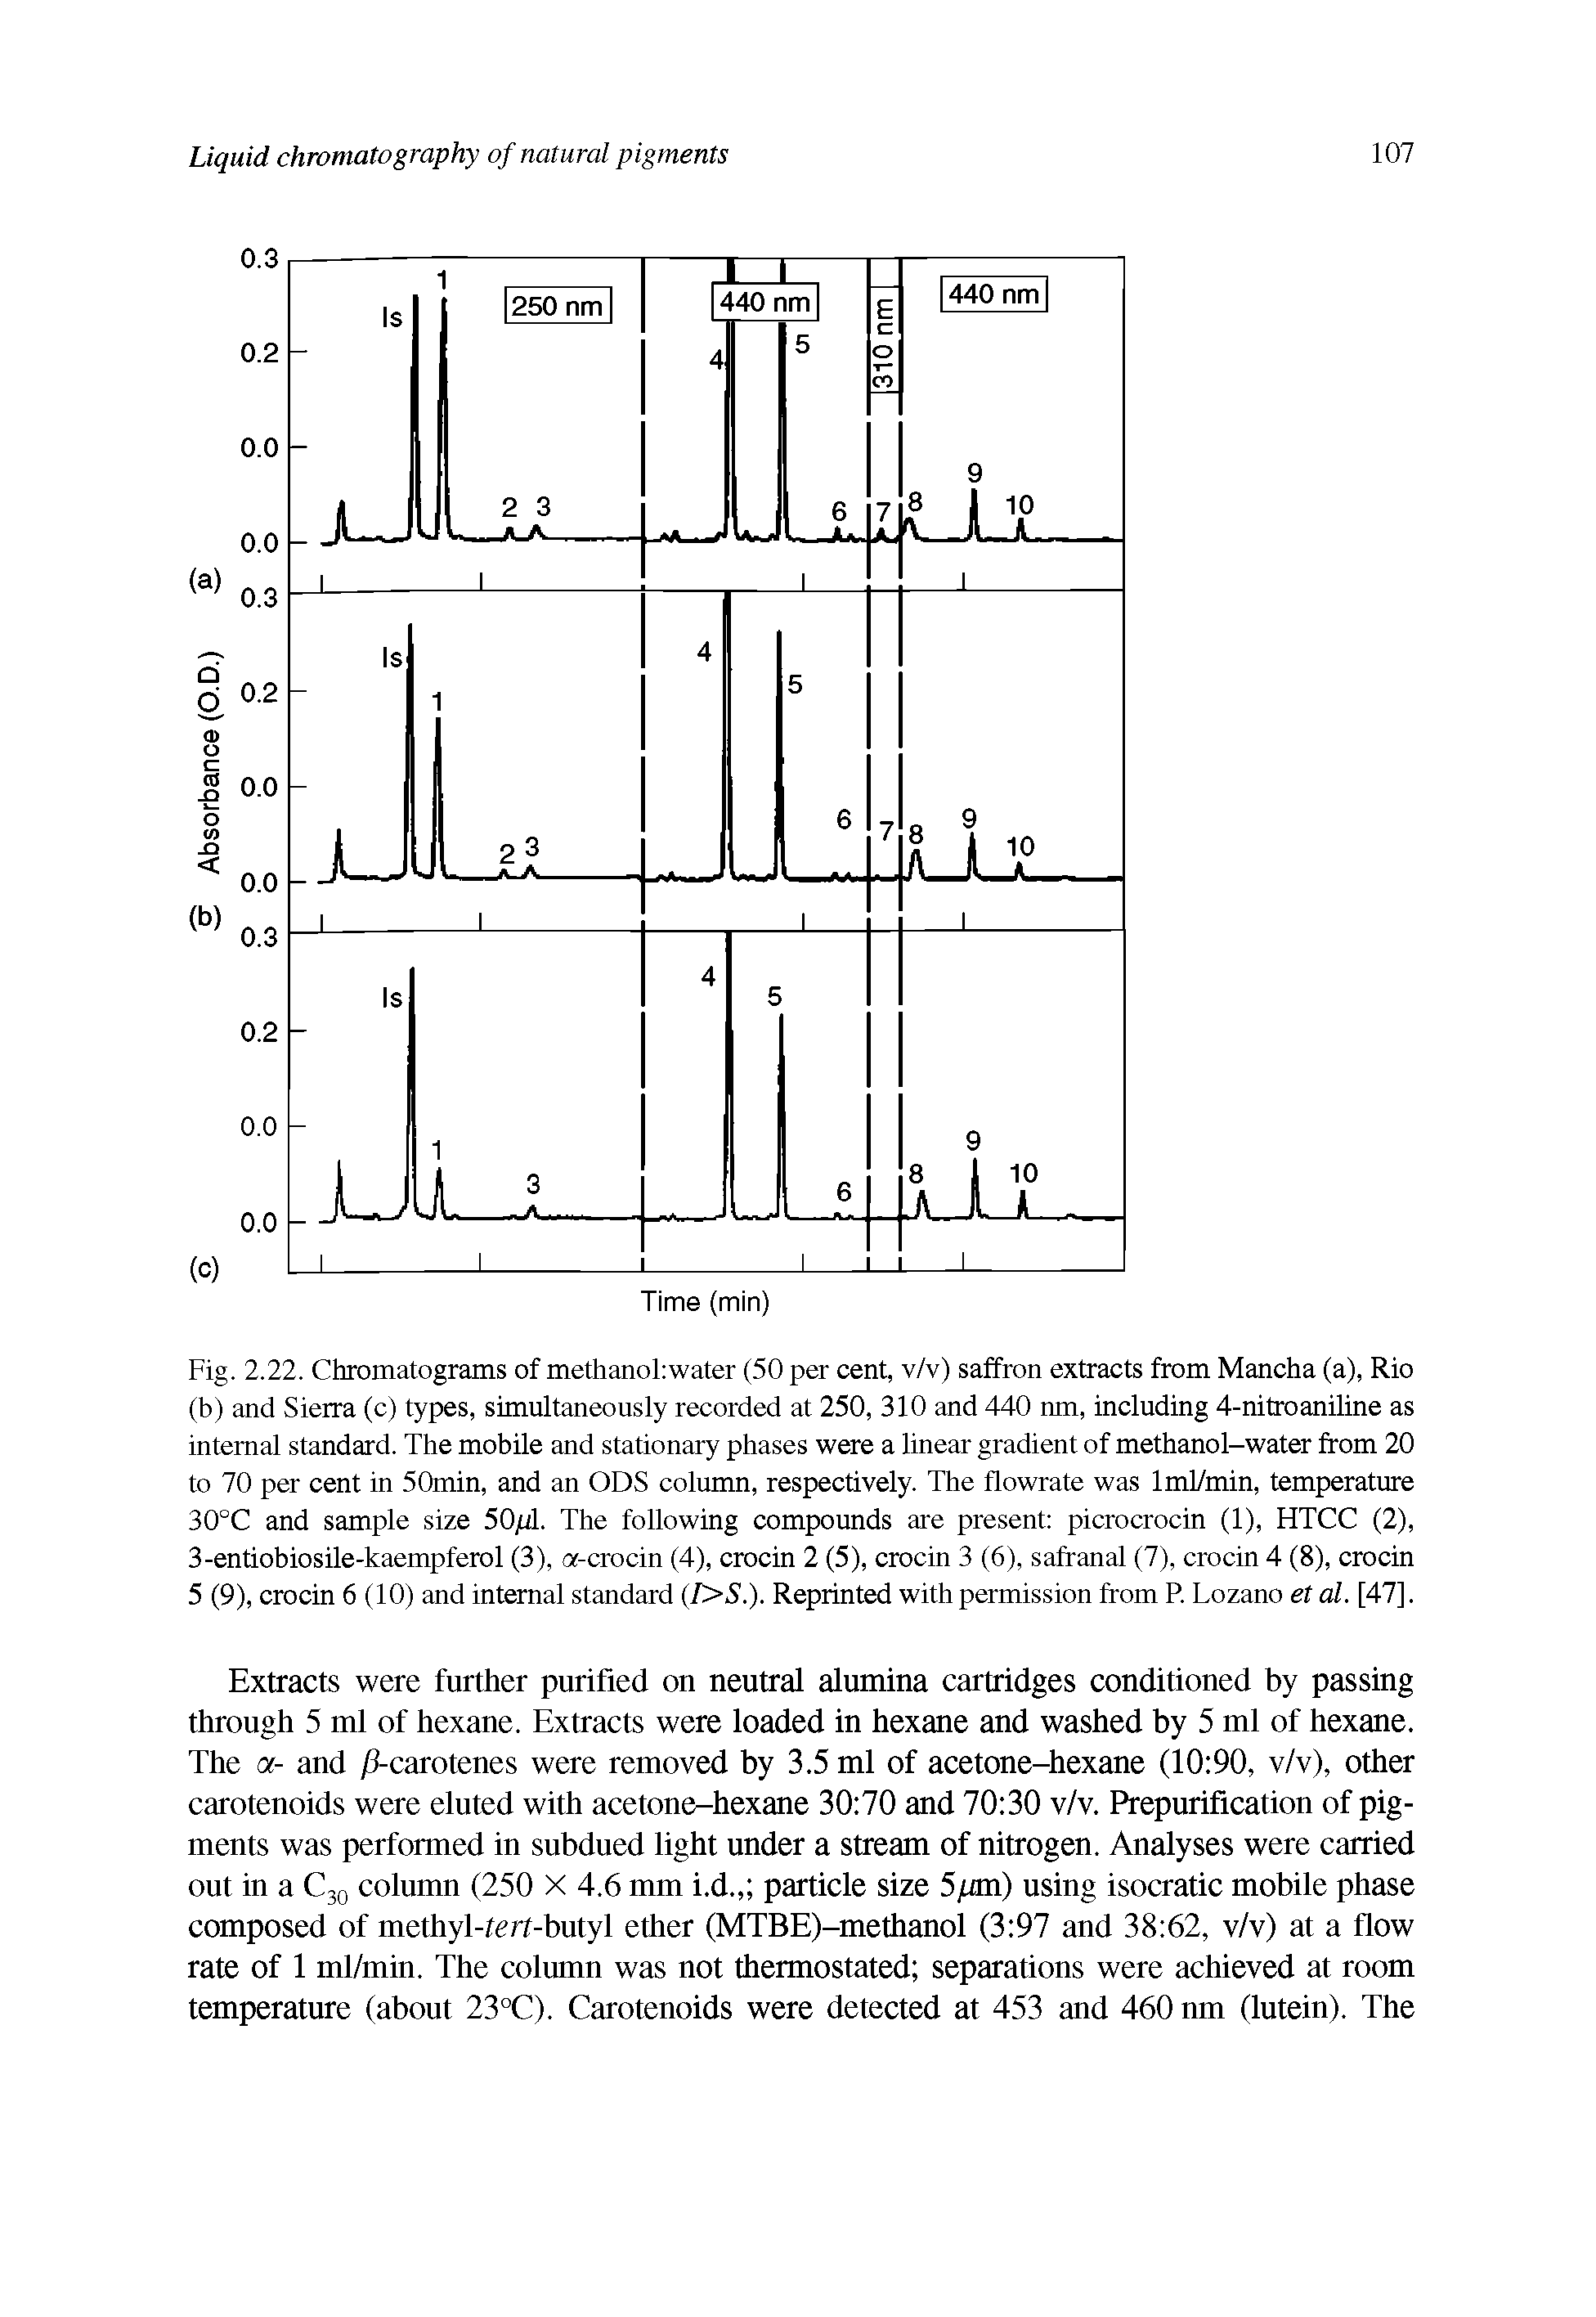 Fig. 2.22. Chromatograms of methanohwater (50 per cent, v/v) saffron extracts from Mancha (a), Rio (b) and Sierra (c) types, simultaneously recorded at 250, 310 and 440 nm, including 4-nitroaniline as internal standard. The mobile and stationary phases were a linear gradient of methanol-water from 20 to 70 per cent in 50min, and an ODS column, respectively. The flowrate was lml/min, temperature 30°C and sample size 50/jl. The following compounds are present picrocrocin (1), HTCC (2), 3-entiobiosile-kaempferol (3), a-crocin (4), crocin 2 (5), crocin 3 (6), safranal (7), crocin 4 (8), crocin 5 (9), crocin 6(10) and internal standard (I>S.). Reprinted with permission from R Lozano et al. [47].